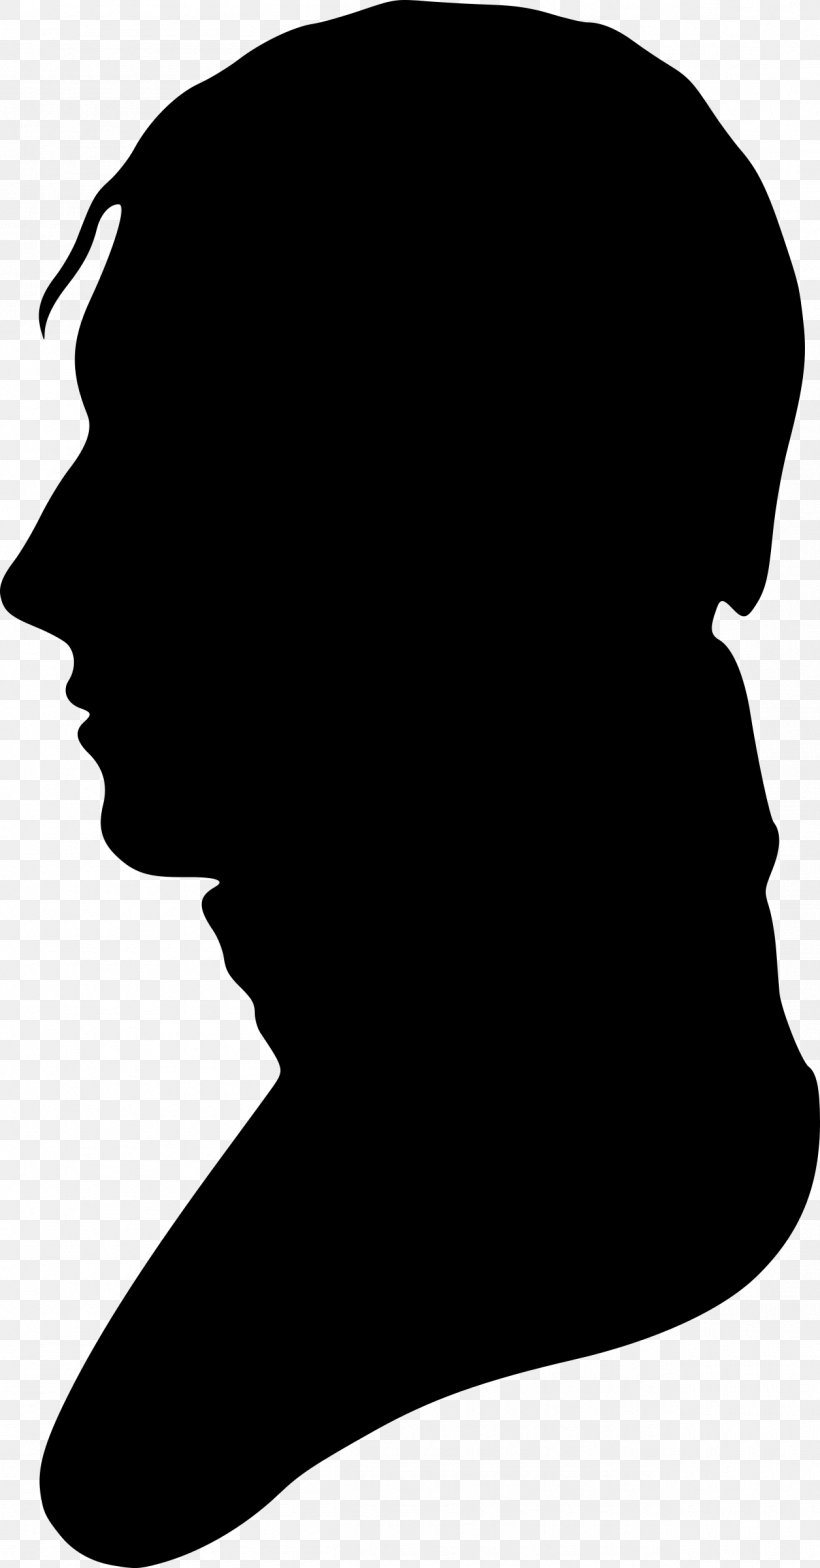 Silhouette Clip Art, PNG, 1255x2400px, Silhouette, Art, Black, Black And White, Graphic Arts Download Free